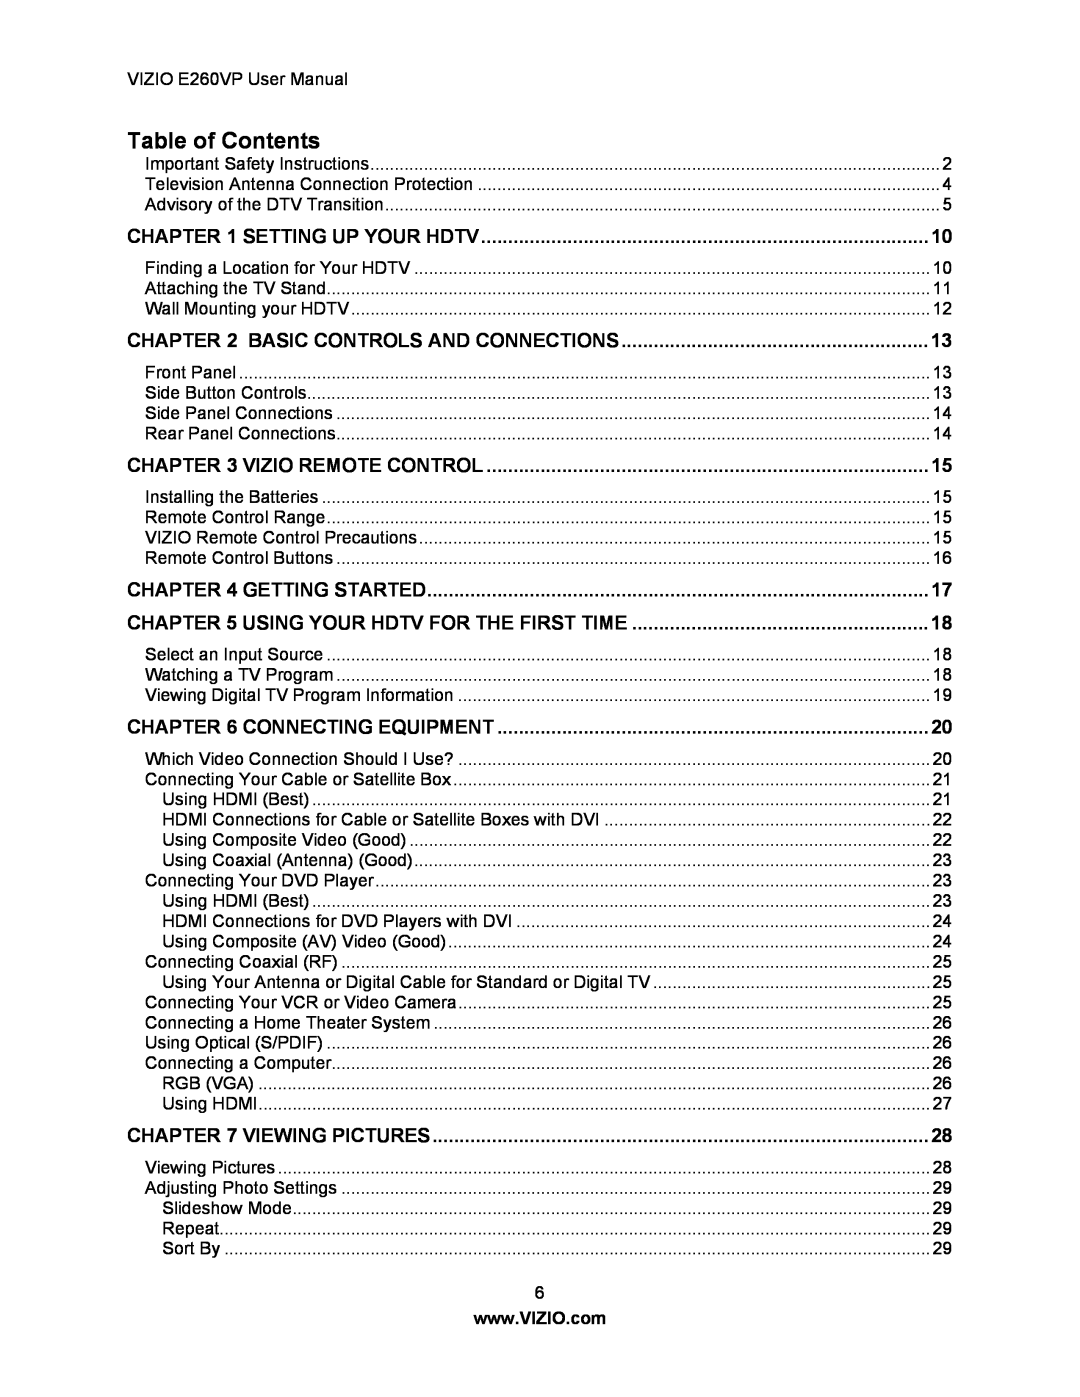 Vizio E260VP user manual Table of Contents, Setting Up Your Hdtv, Basic Controls And Connections, Vizio Remote Control 